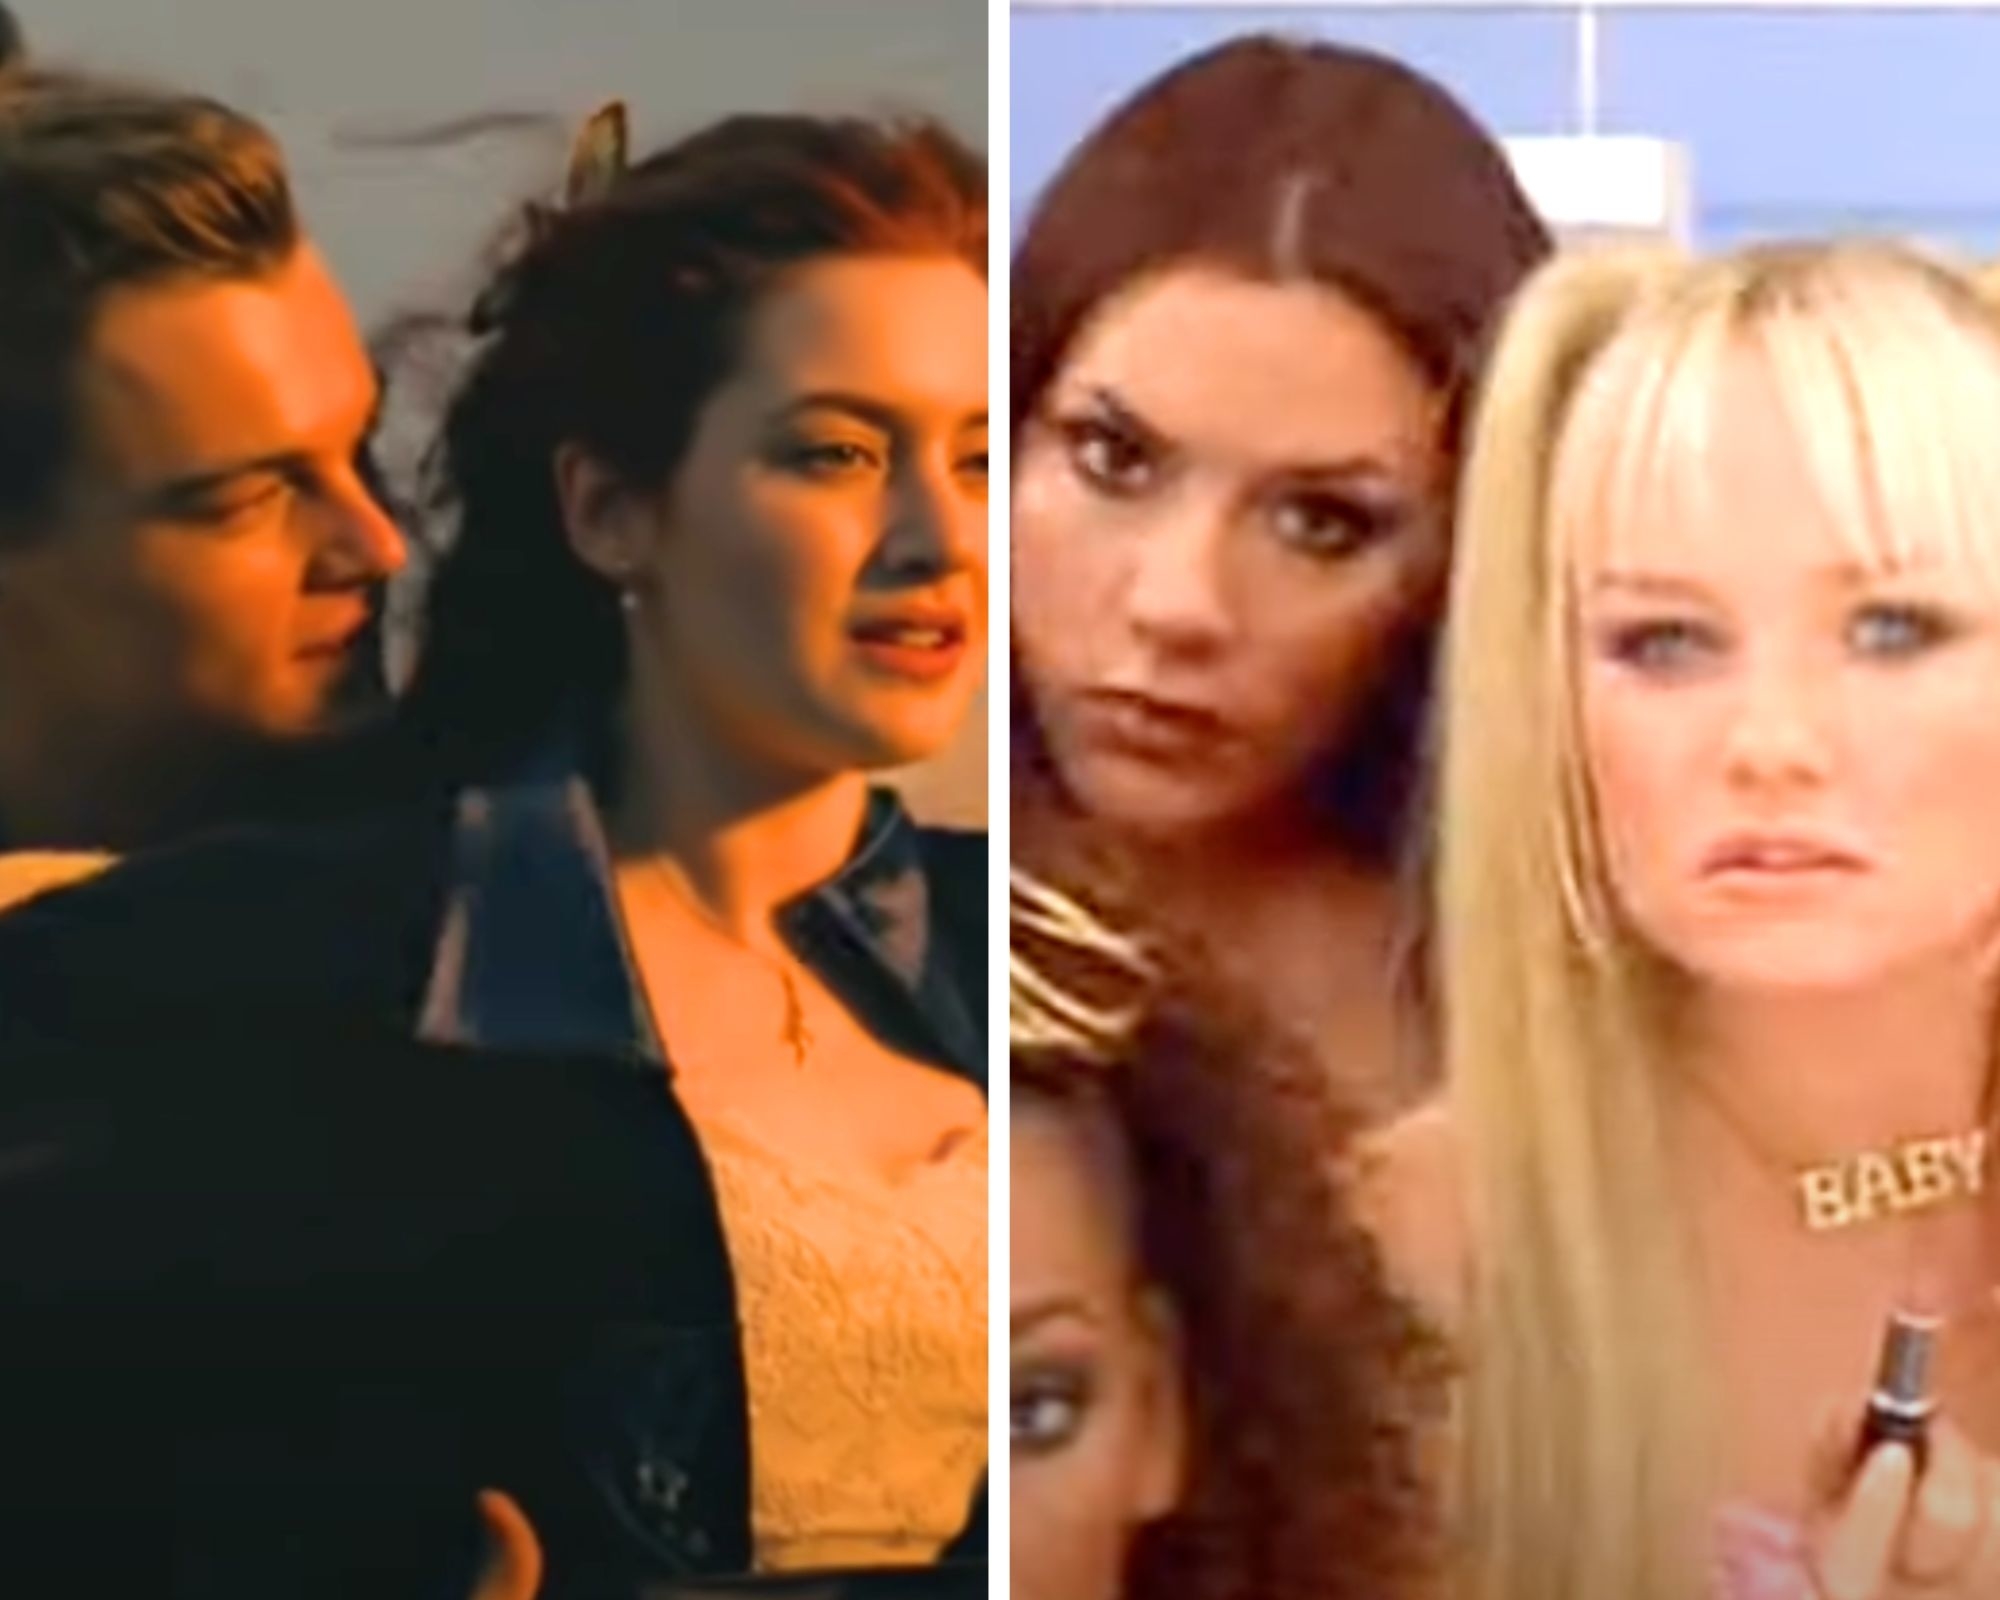 Leonardo Dicaprio and Kate Winslet in Titanic, and the Spice girls band in Spice world